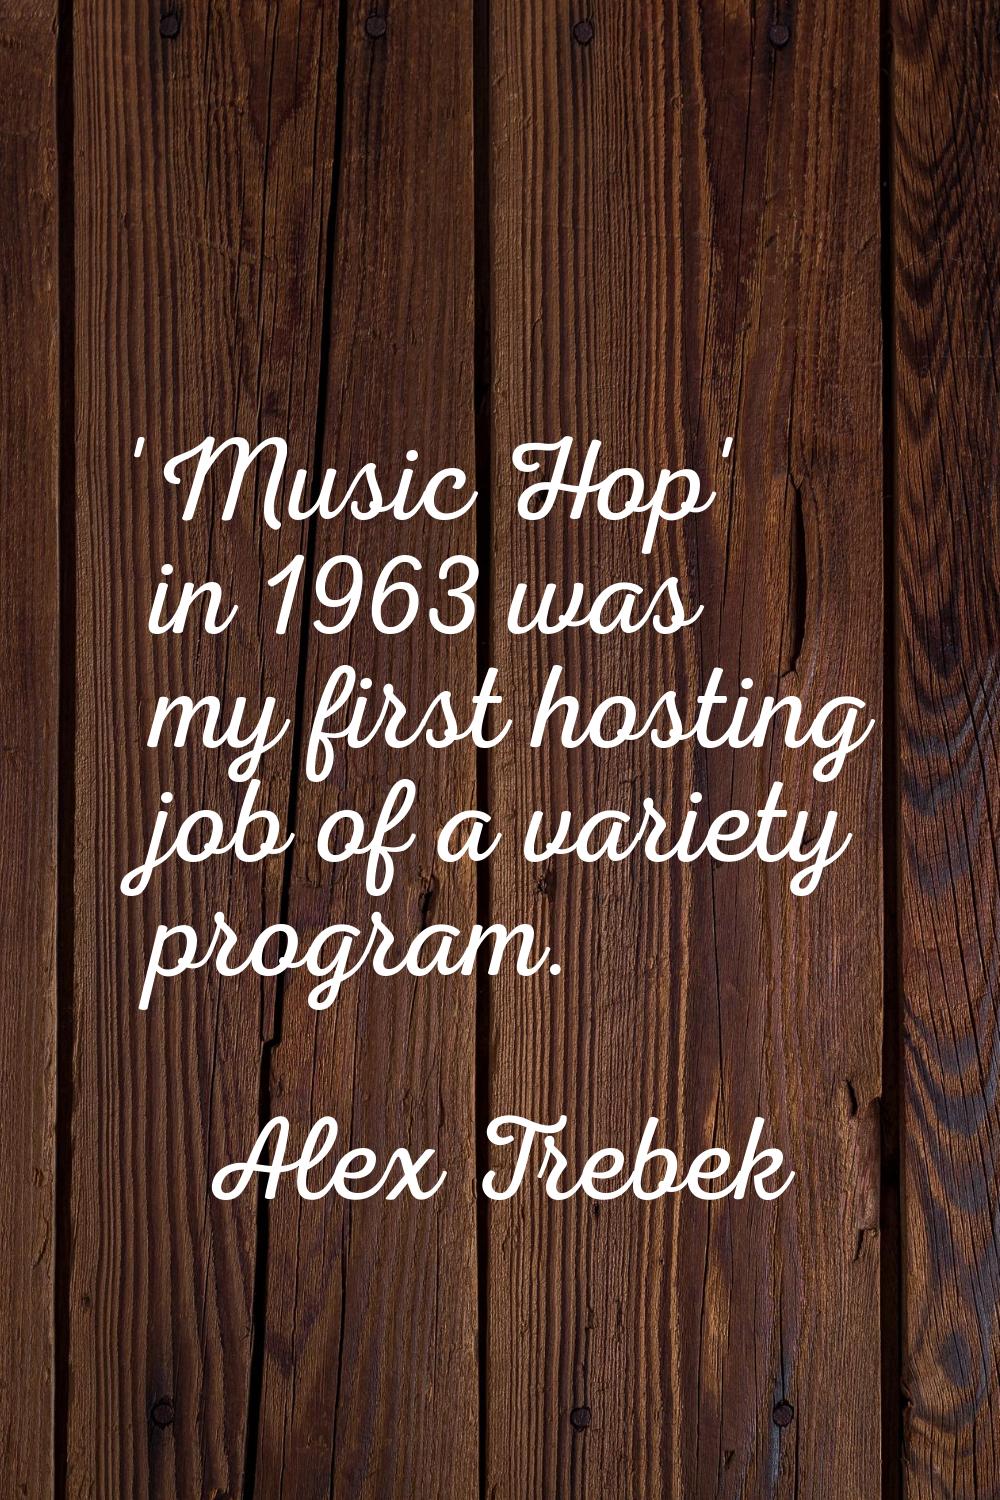 'Music Hop' in 1963 was my first hosting job of a variety program.